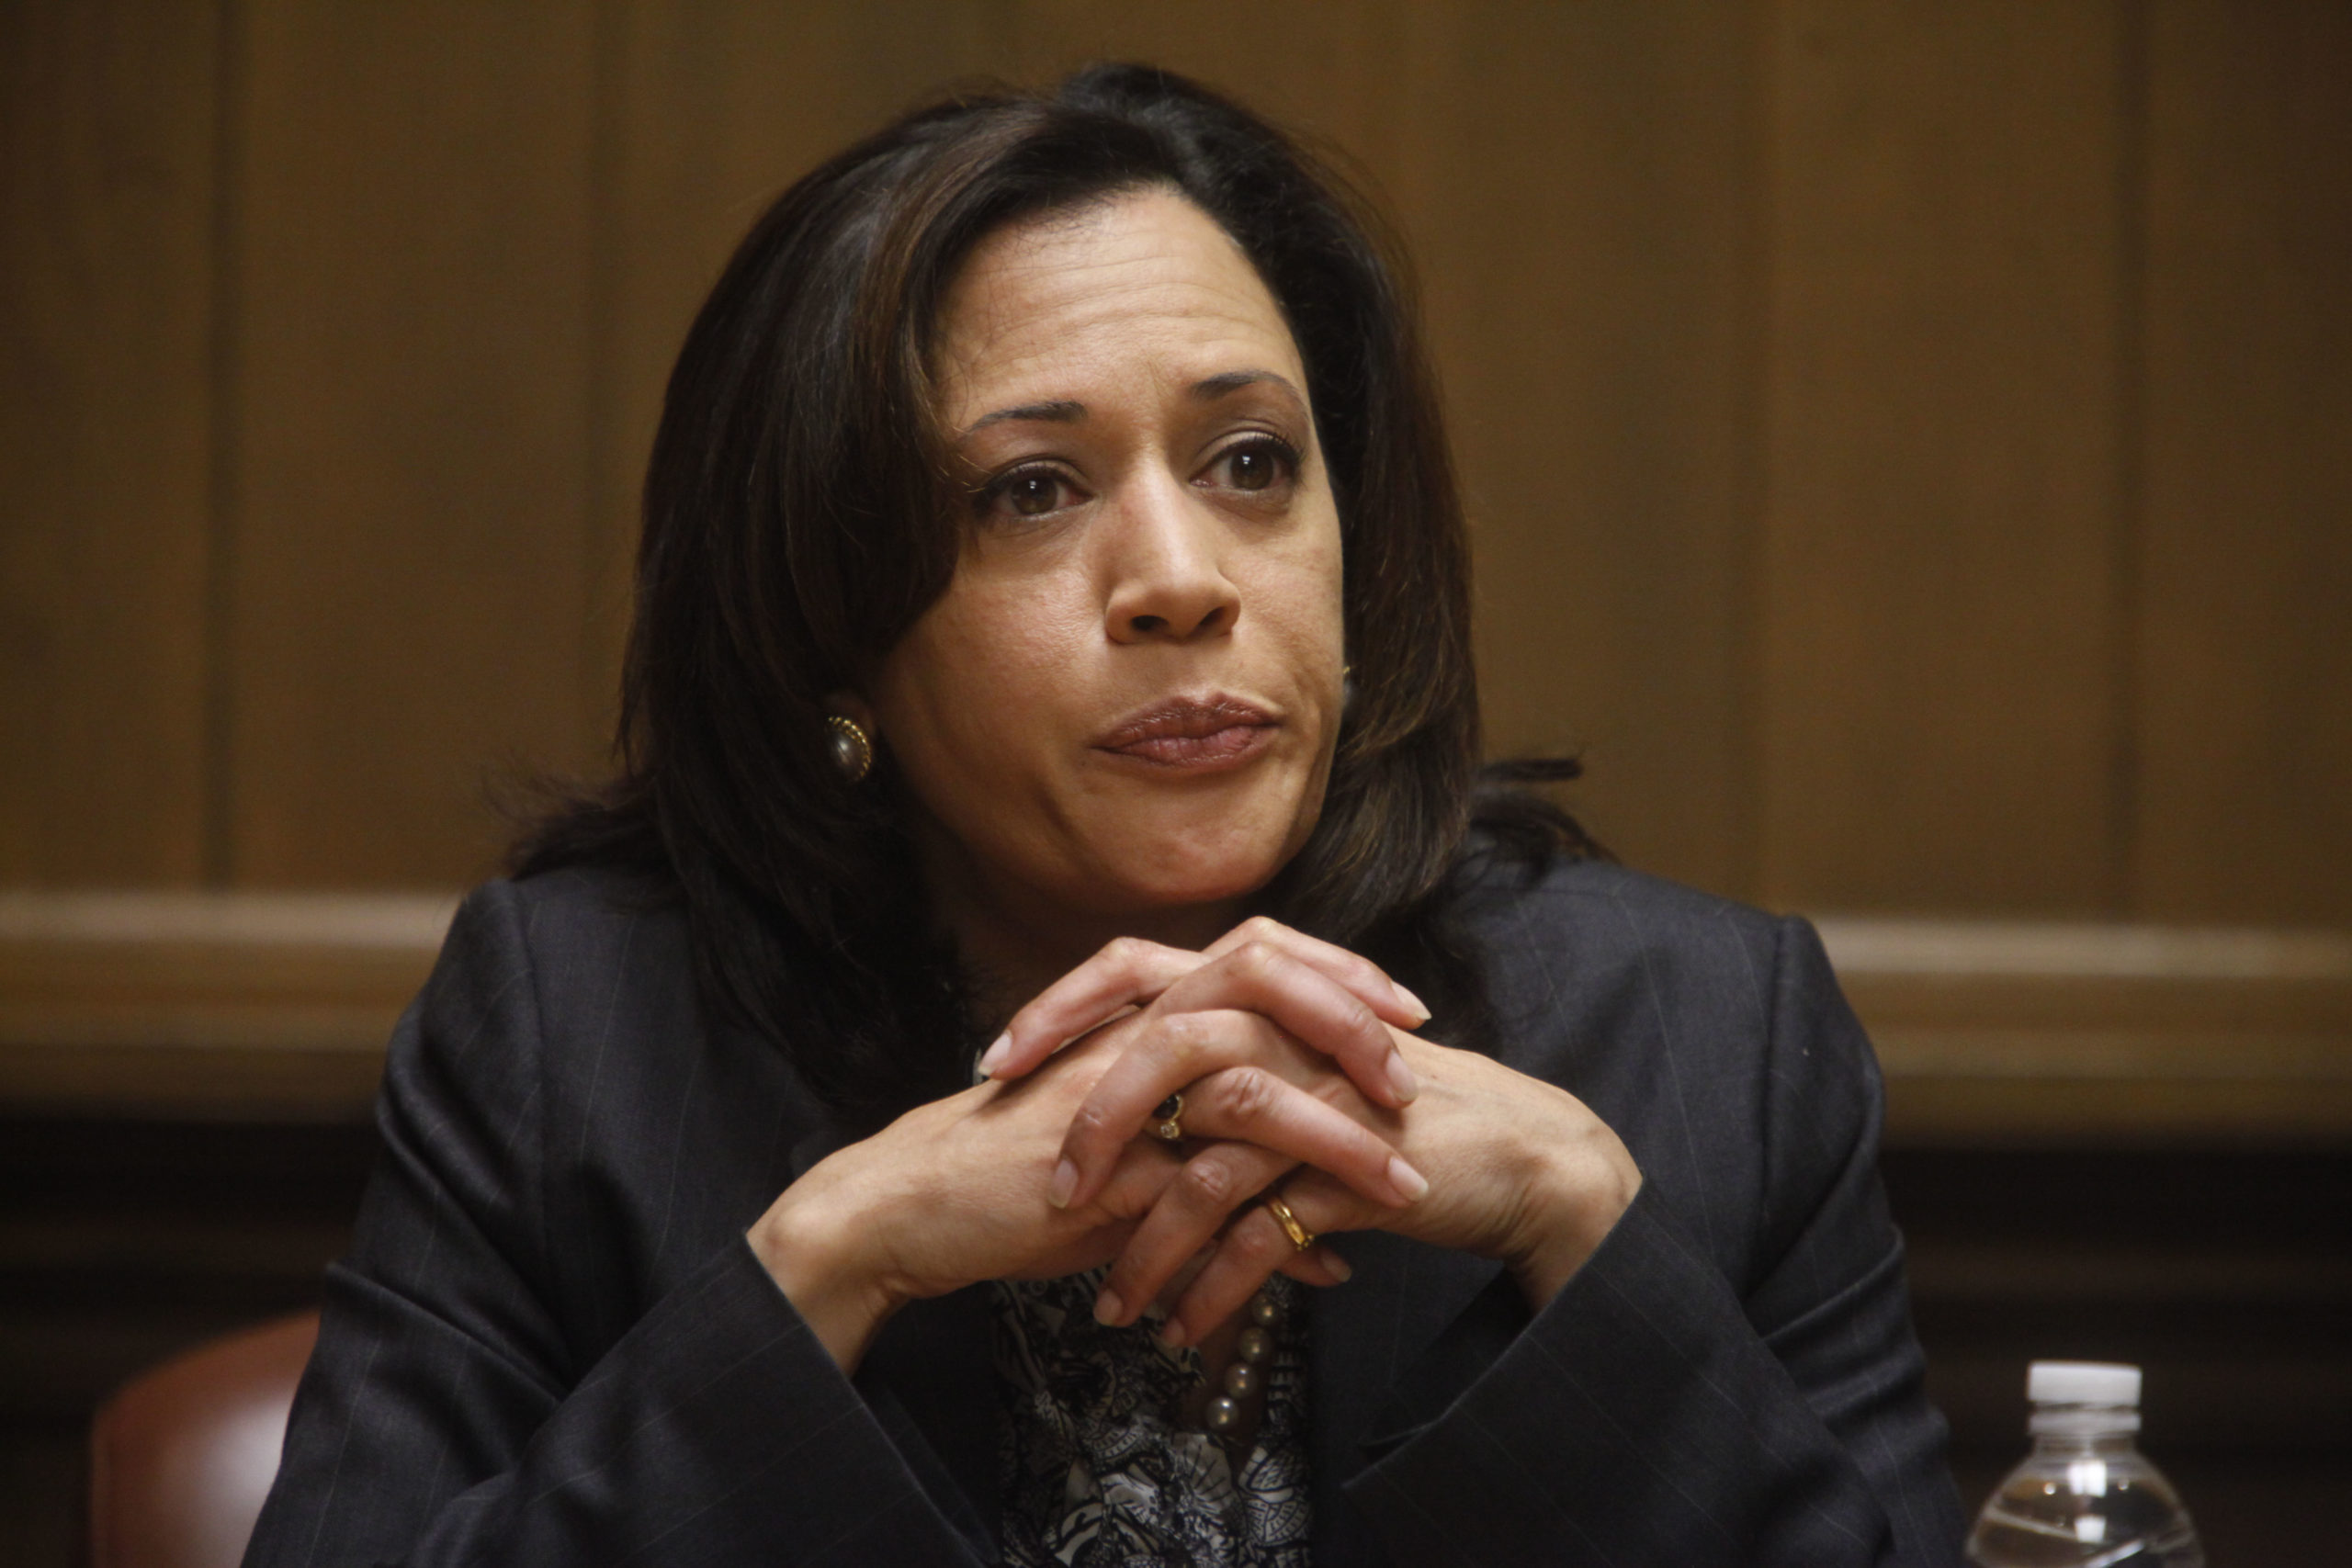 San Francisco District Attorney Kamala Harris during her campaign to become California Attorney General in 2010 